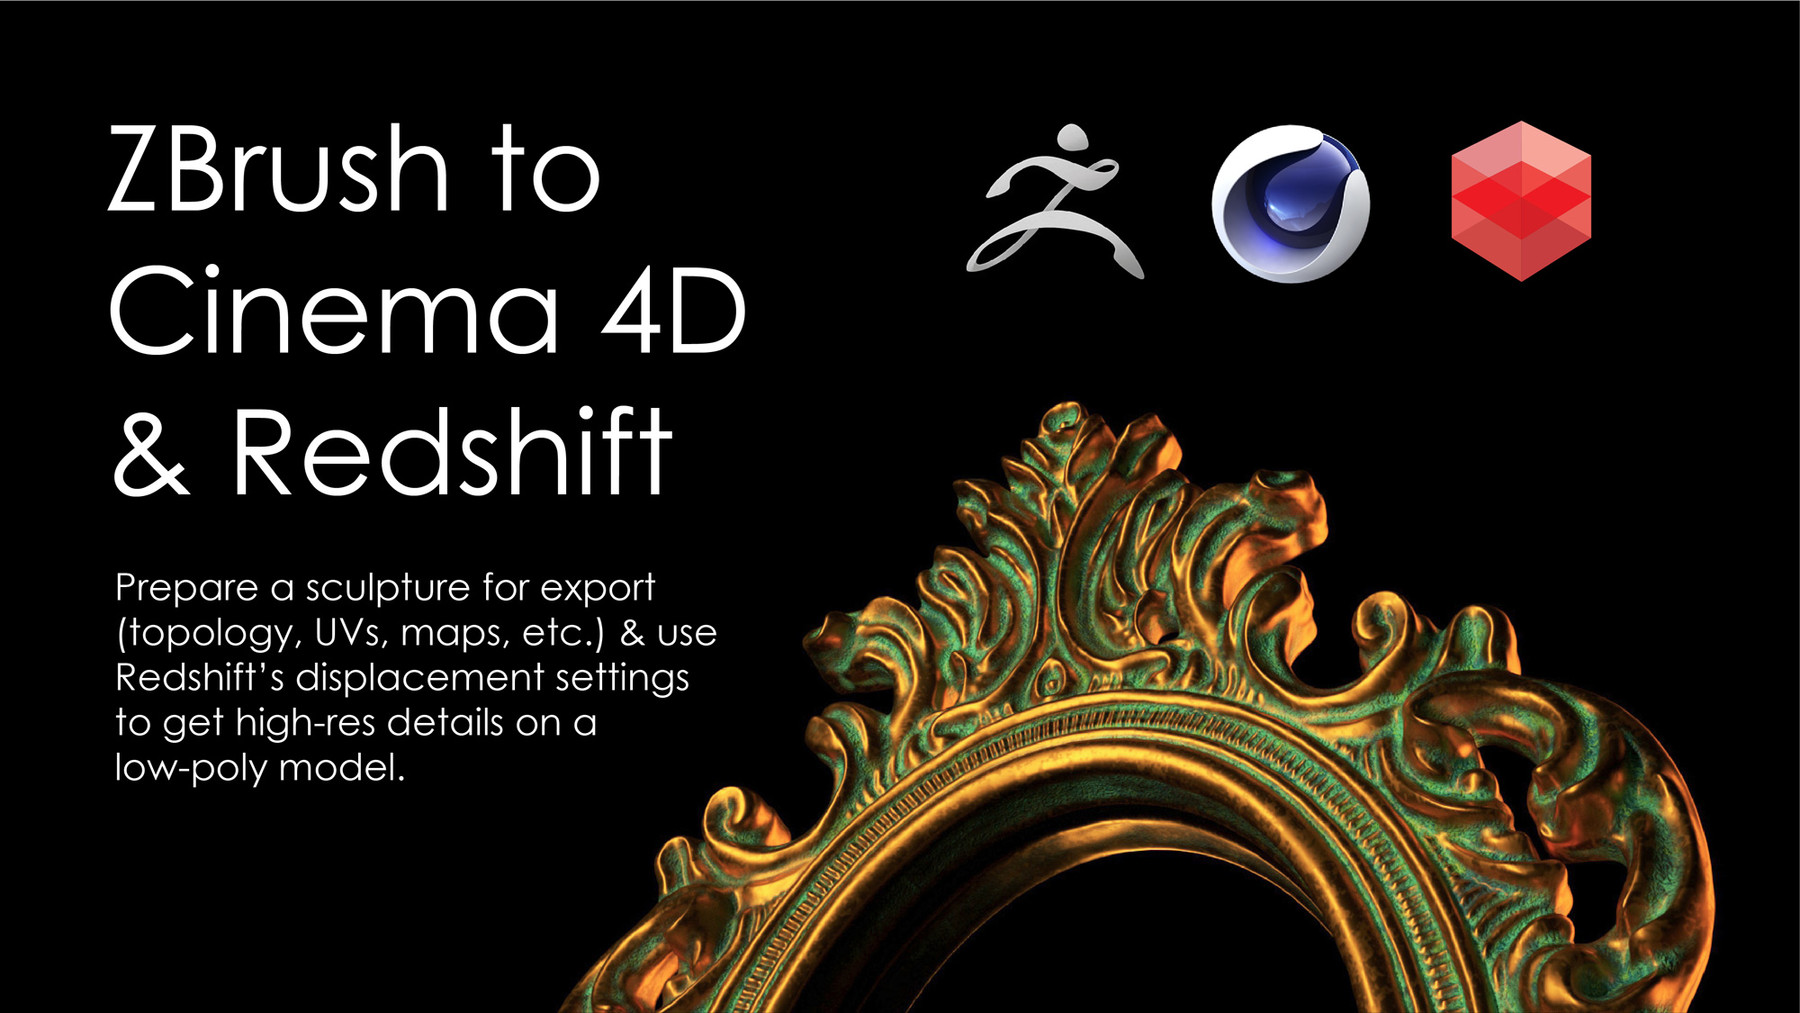 zbrush and cinema 4d